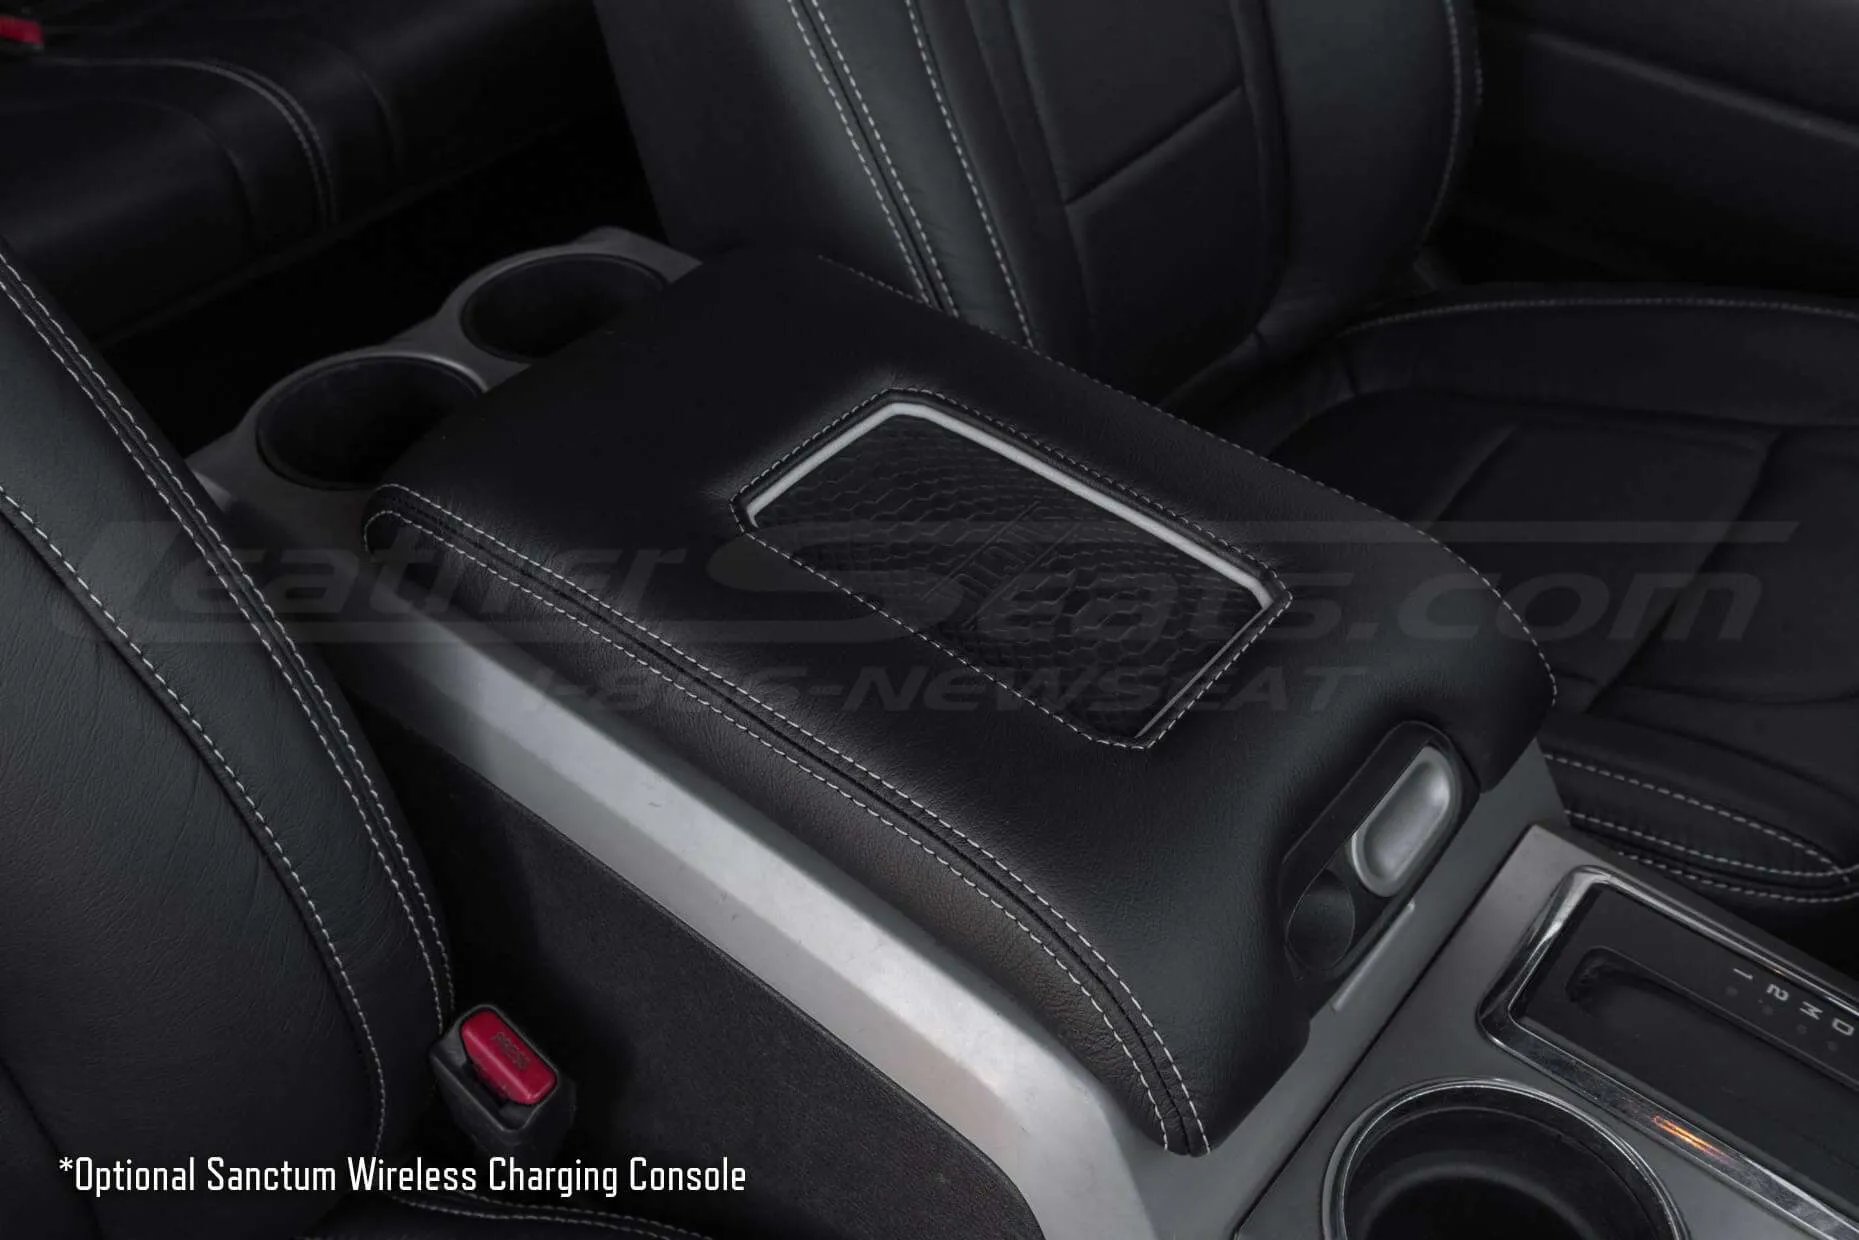 Passenger side view of phone charging center console for ford trucks